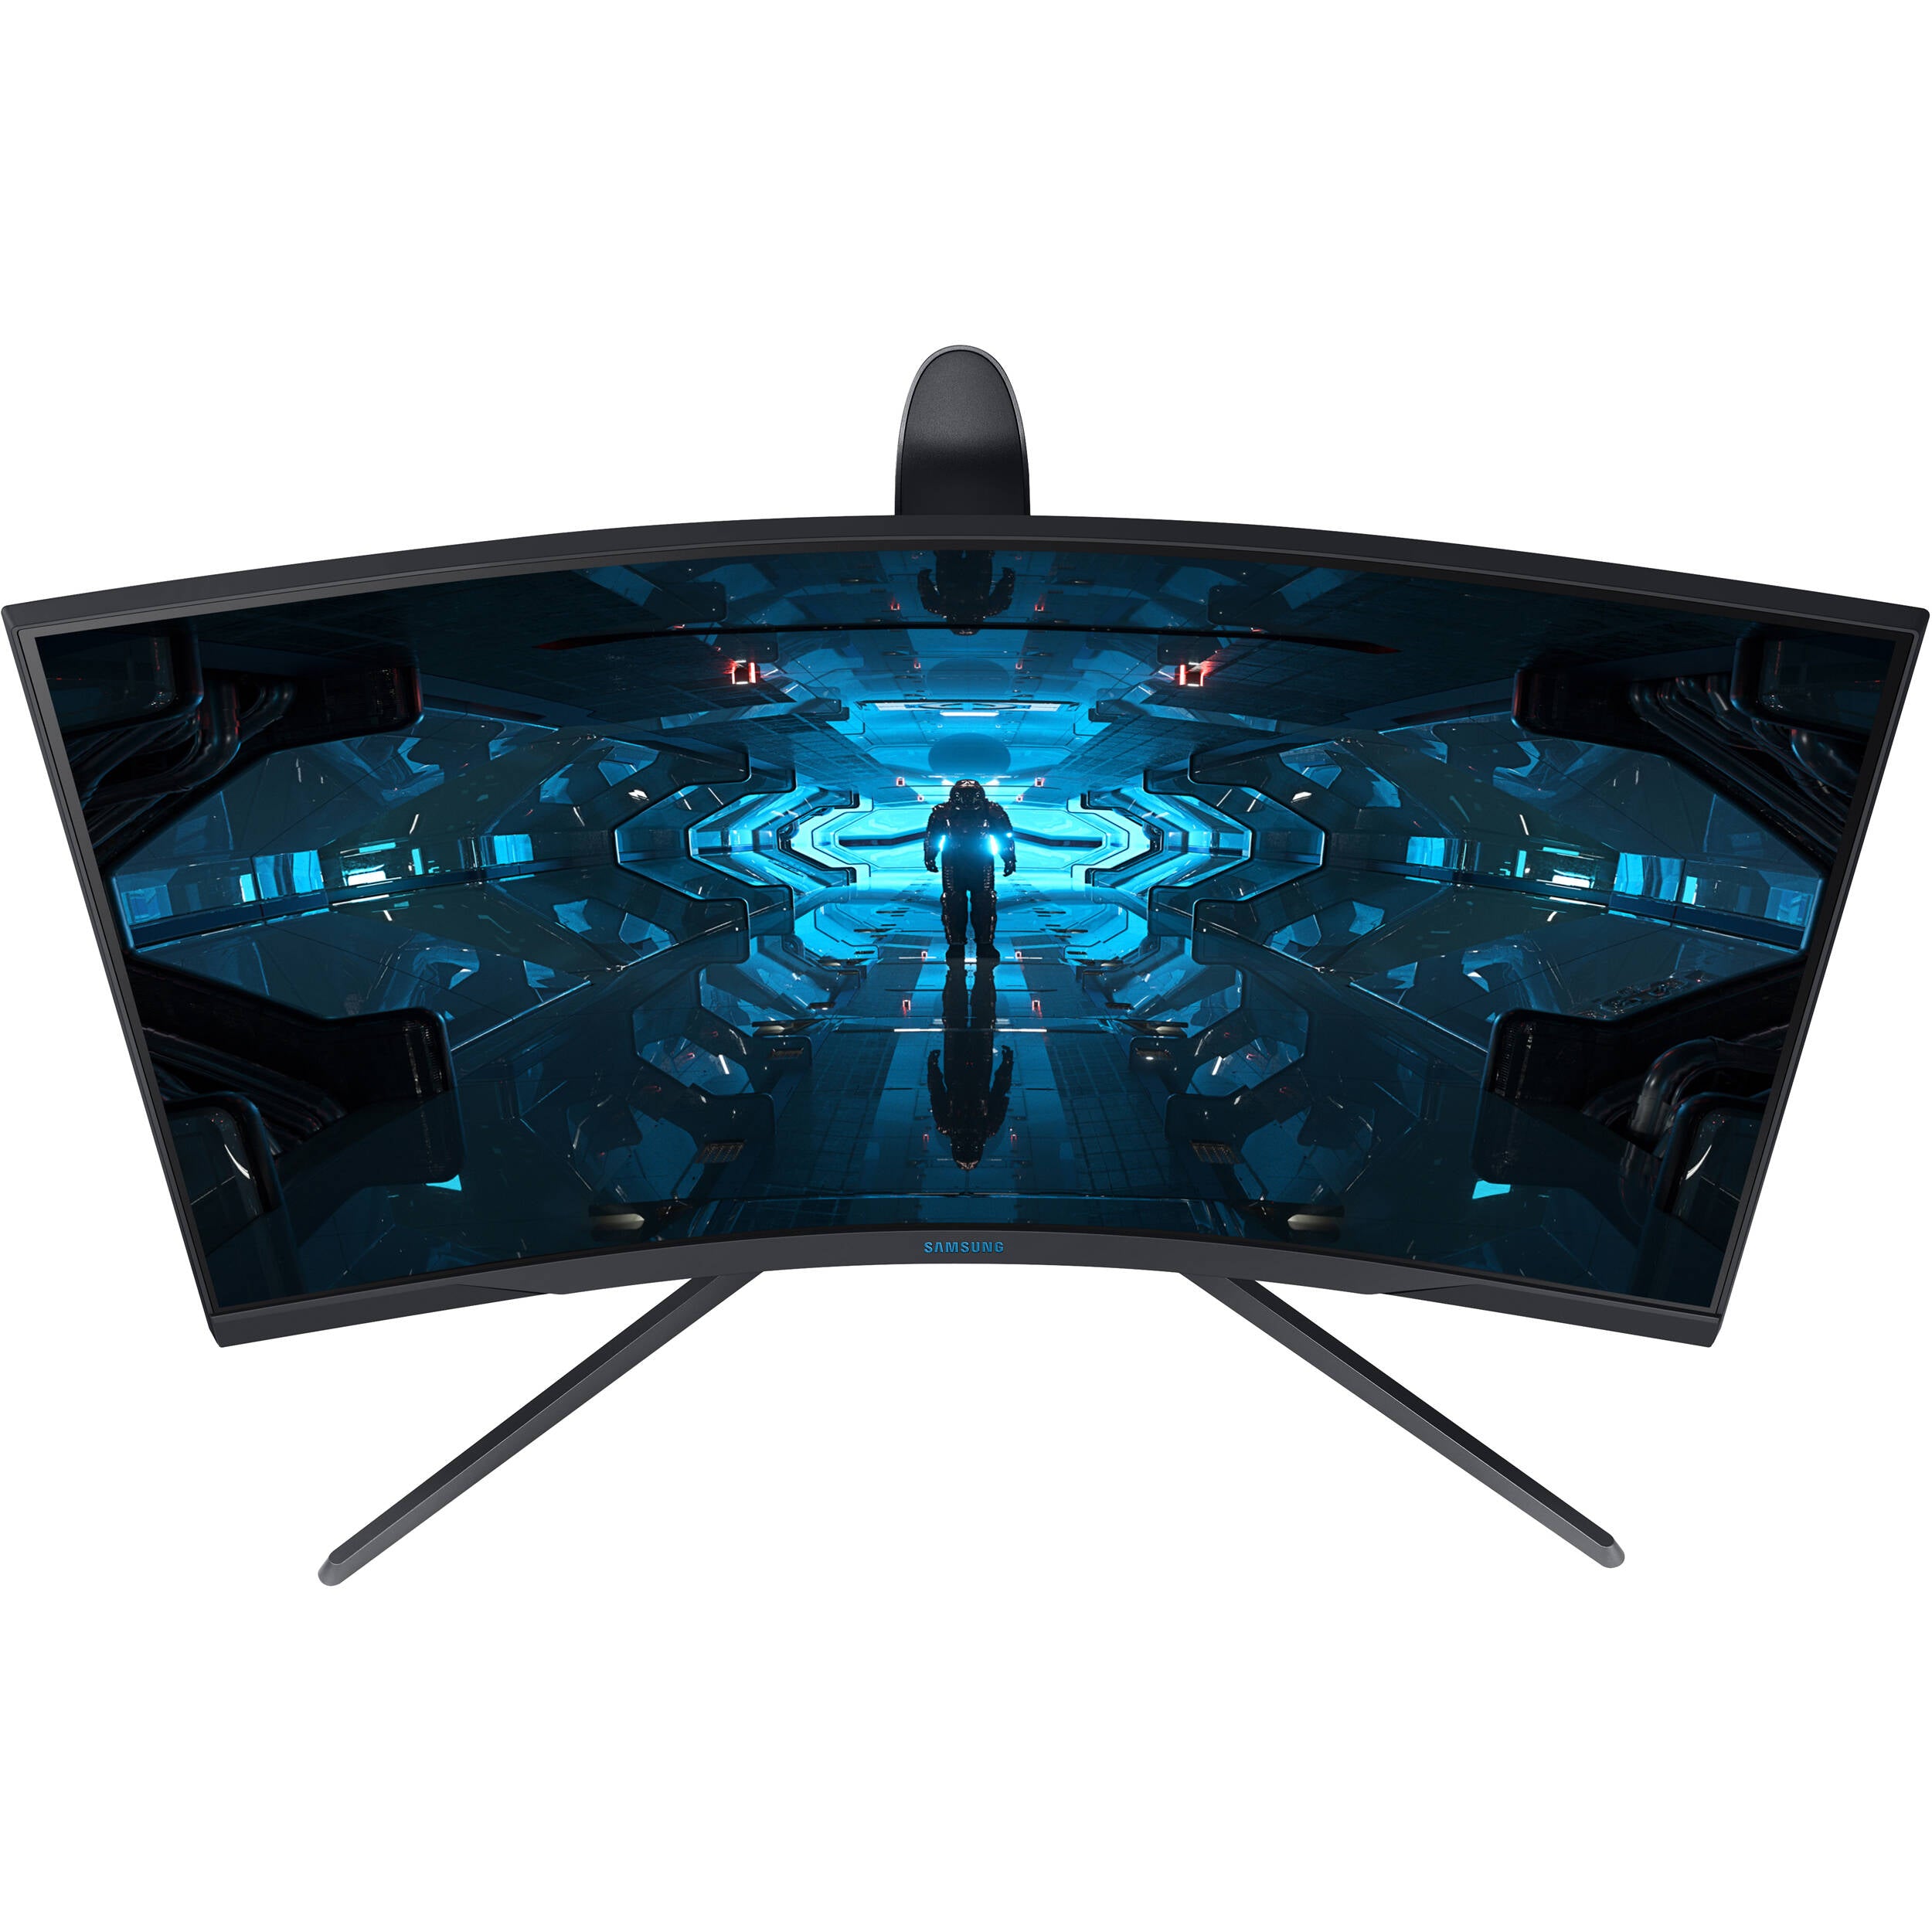 Samsung LC32G73TQSNXZA-RB 32" WQHD 2560 x 1440 240Hz Curved Gaming Monitor - Certified Refurbished